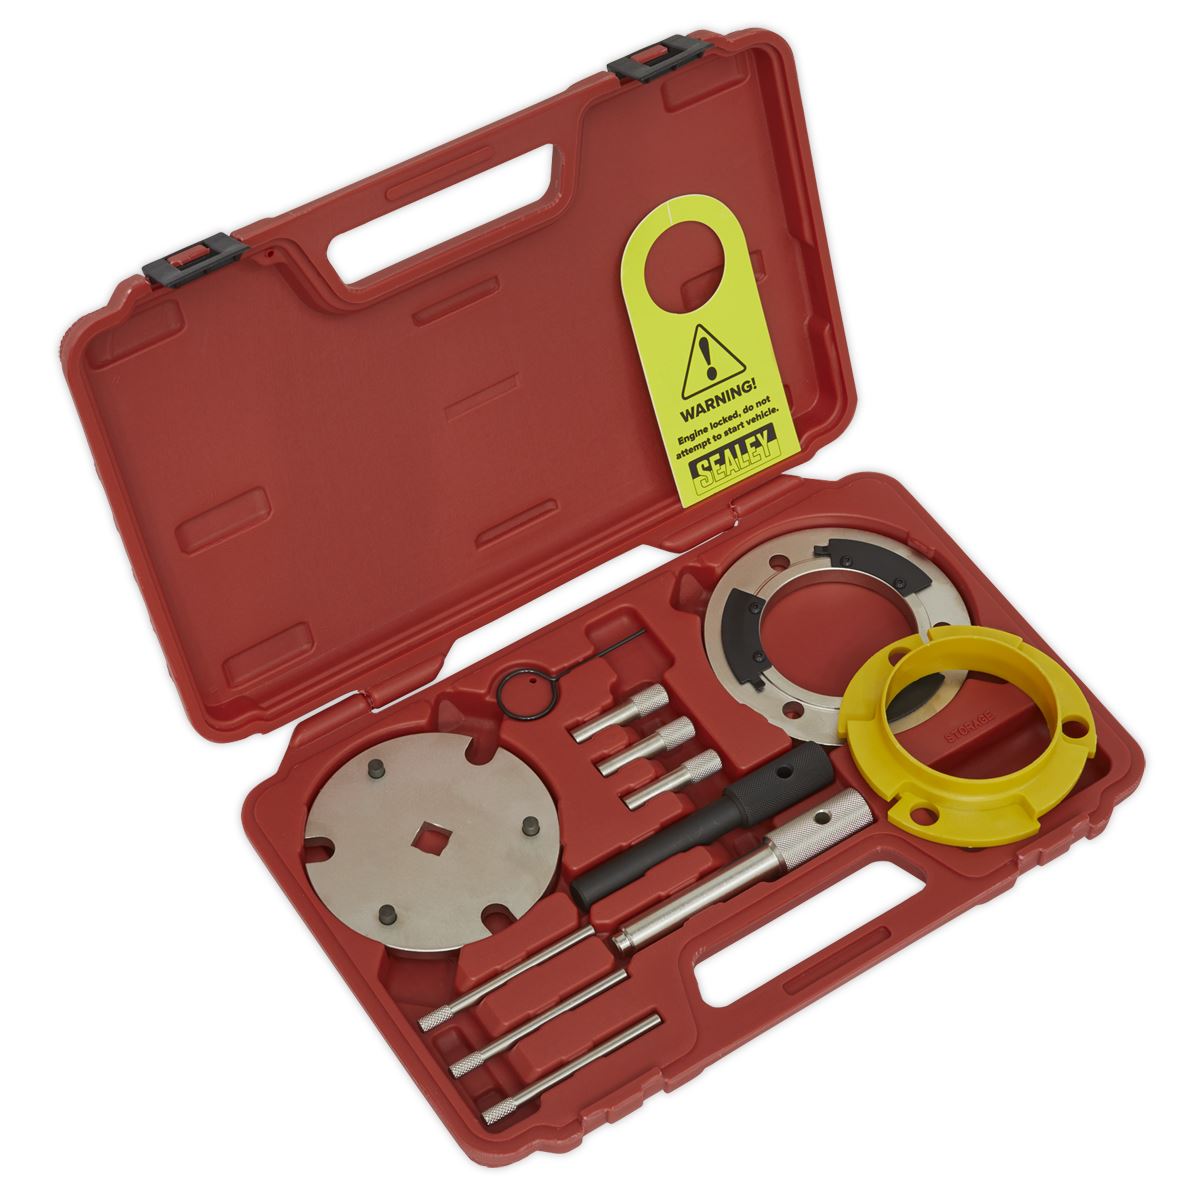 Sealey Diesel Engine Timing Tool & Injection Pump Tool Kit - 2.0D, 2.2D, 2.4D Duratorq - Chain Drive